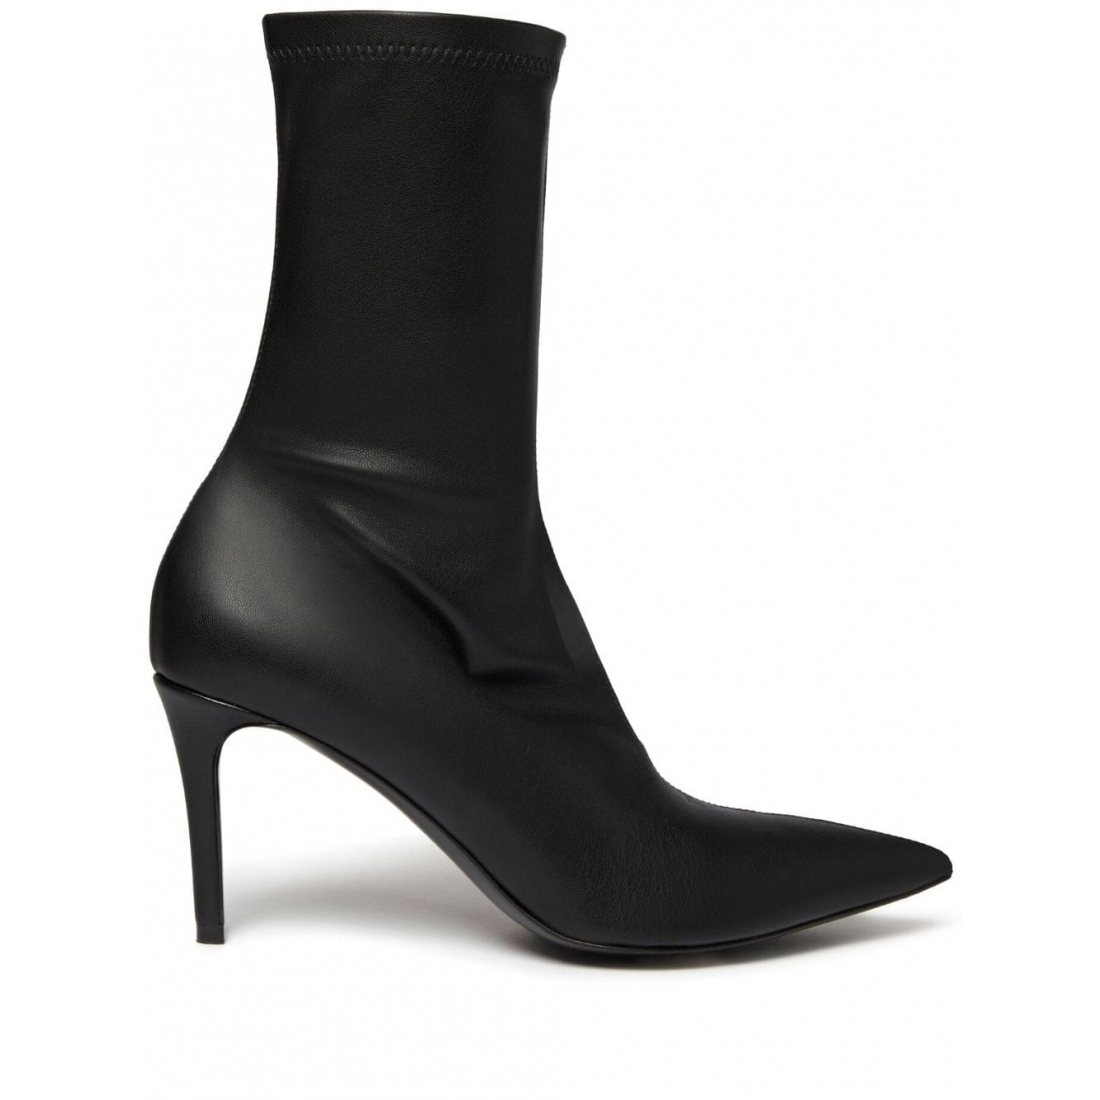 Women's 'Iconic' Ankle Boots